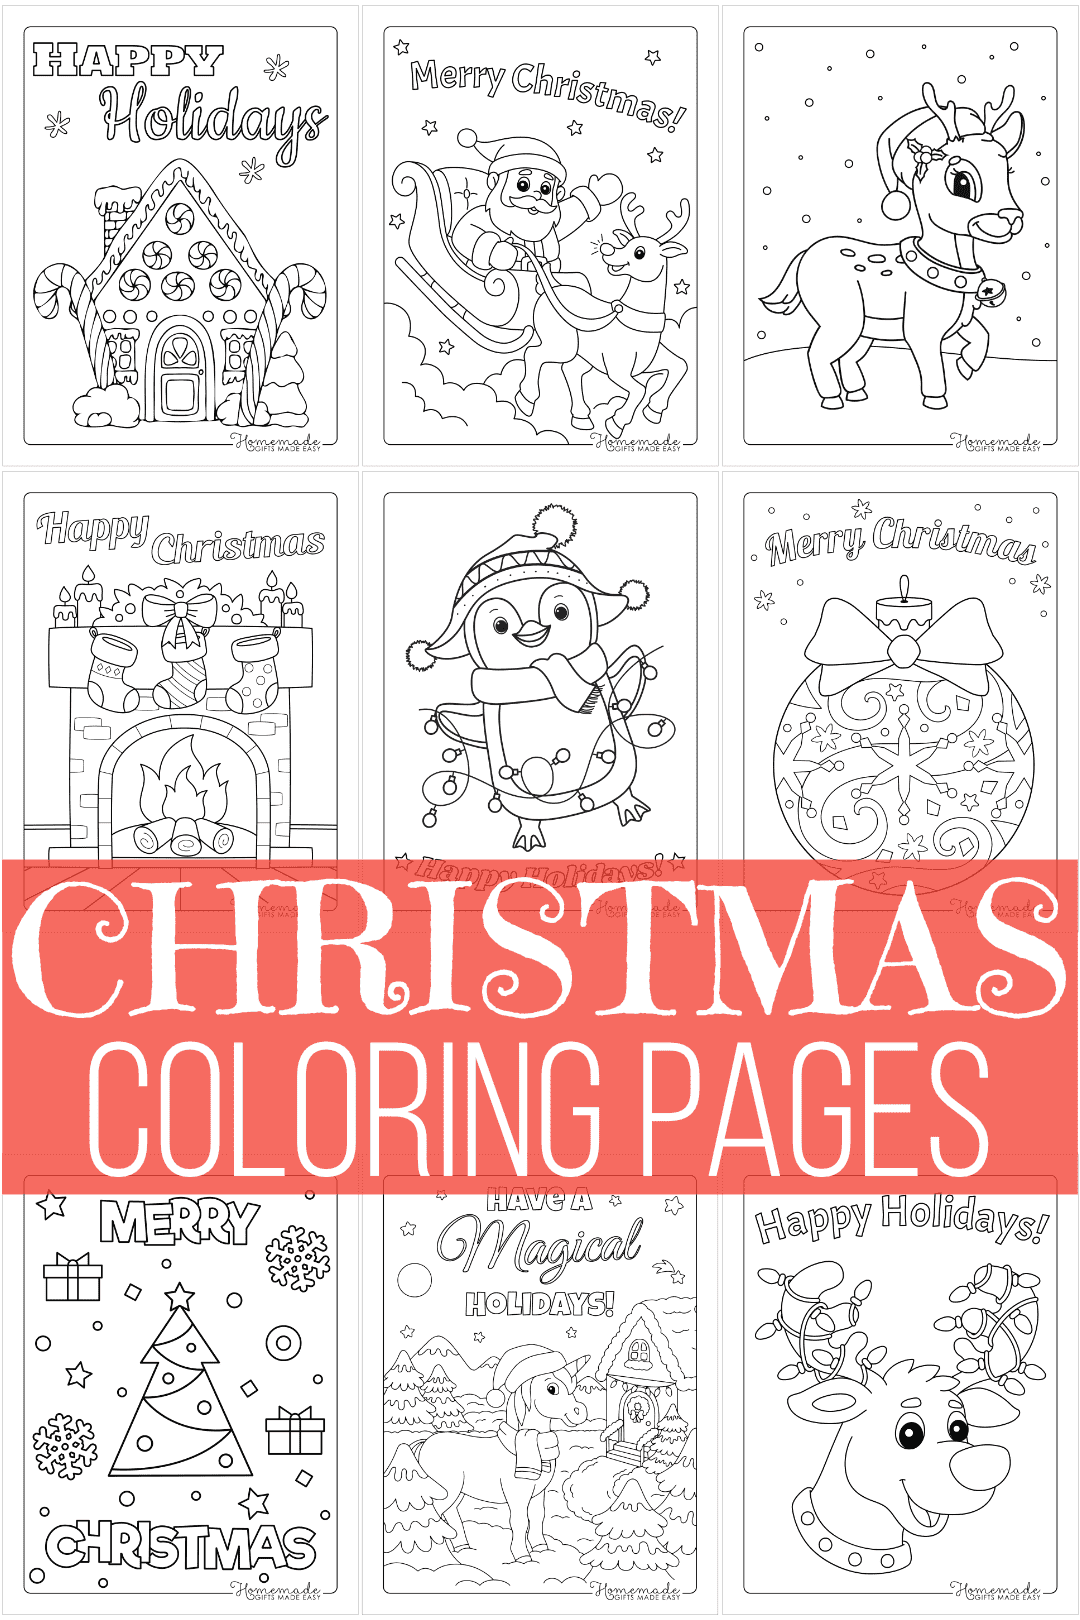 free printable christmas coloring pages - 130 designs